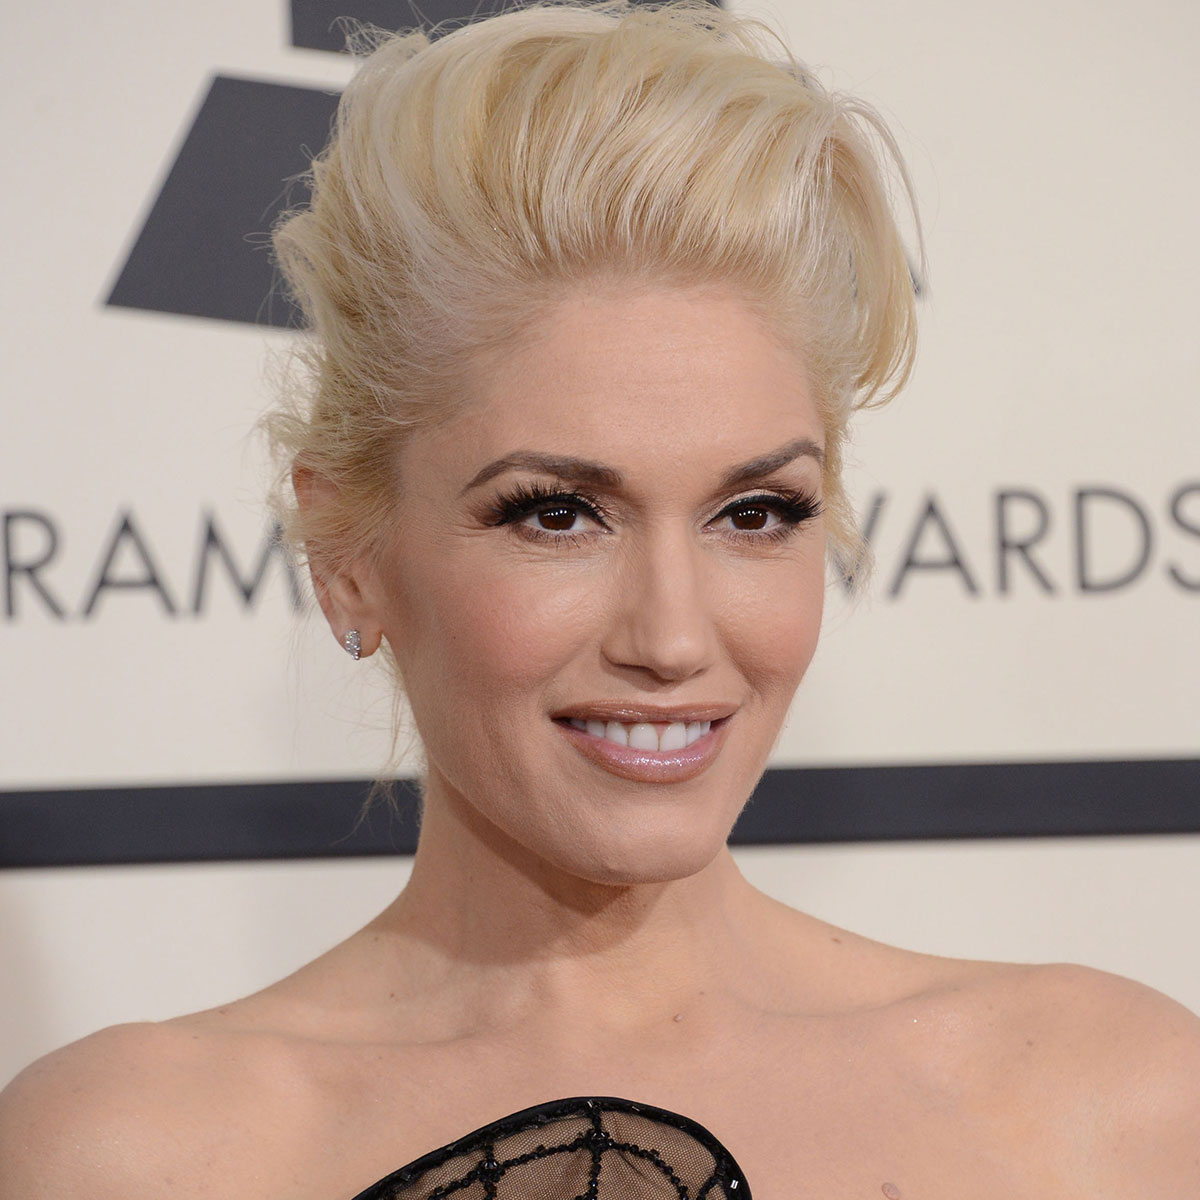 Gwen Stefani shows off her real natural face in rare unedited photos  snapped after daytime TV appearance